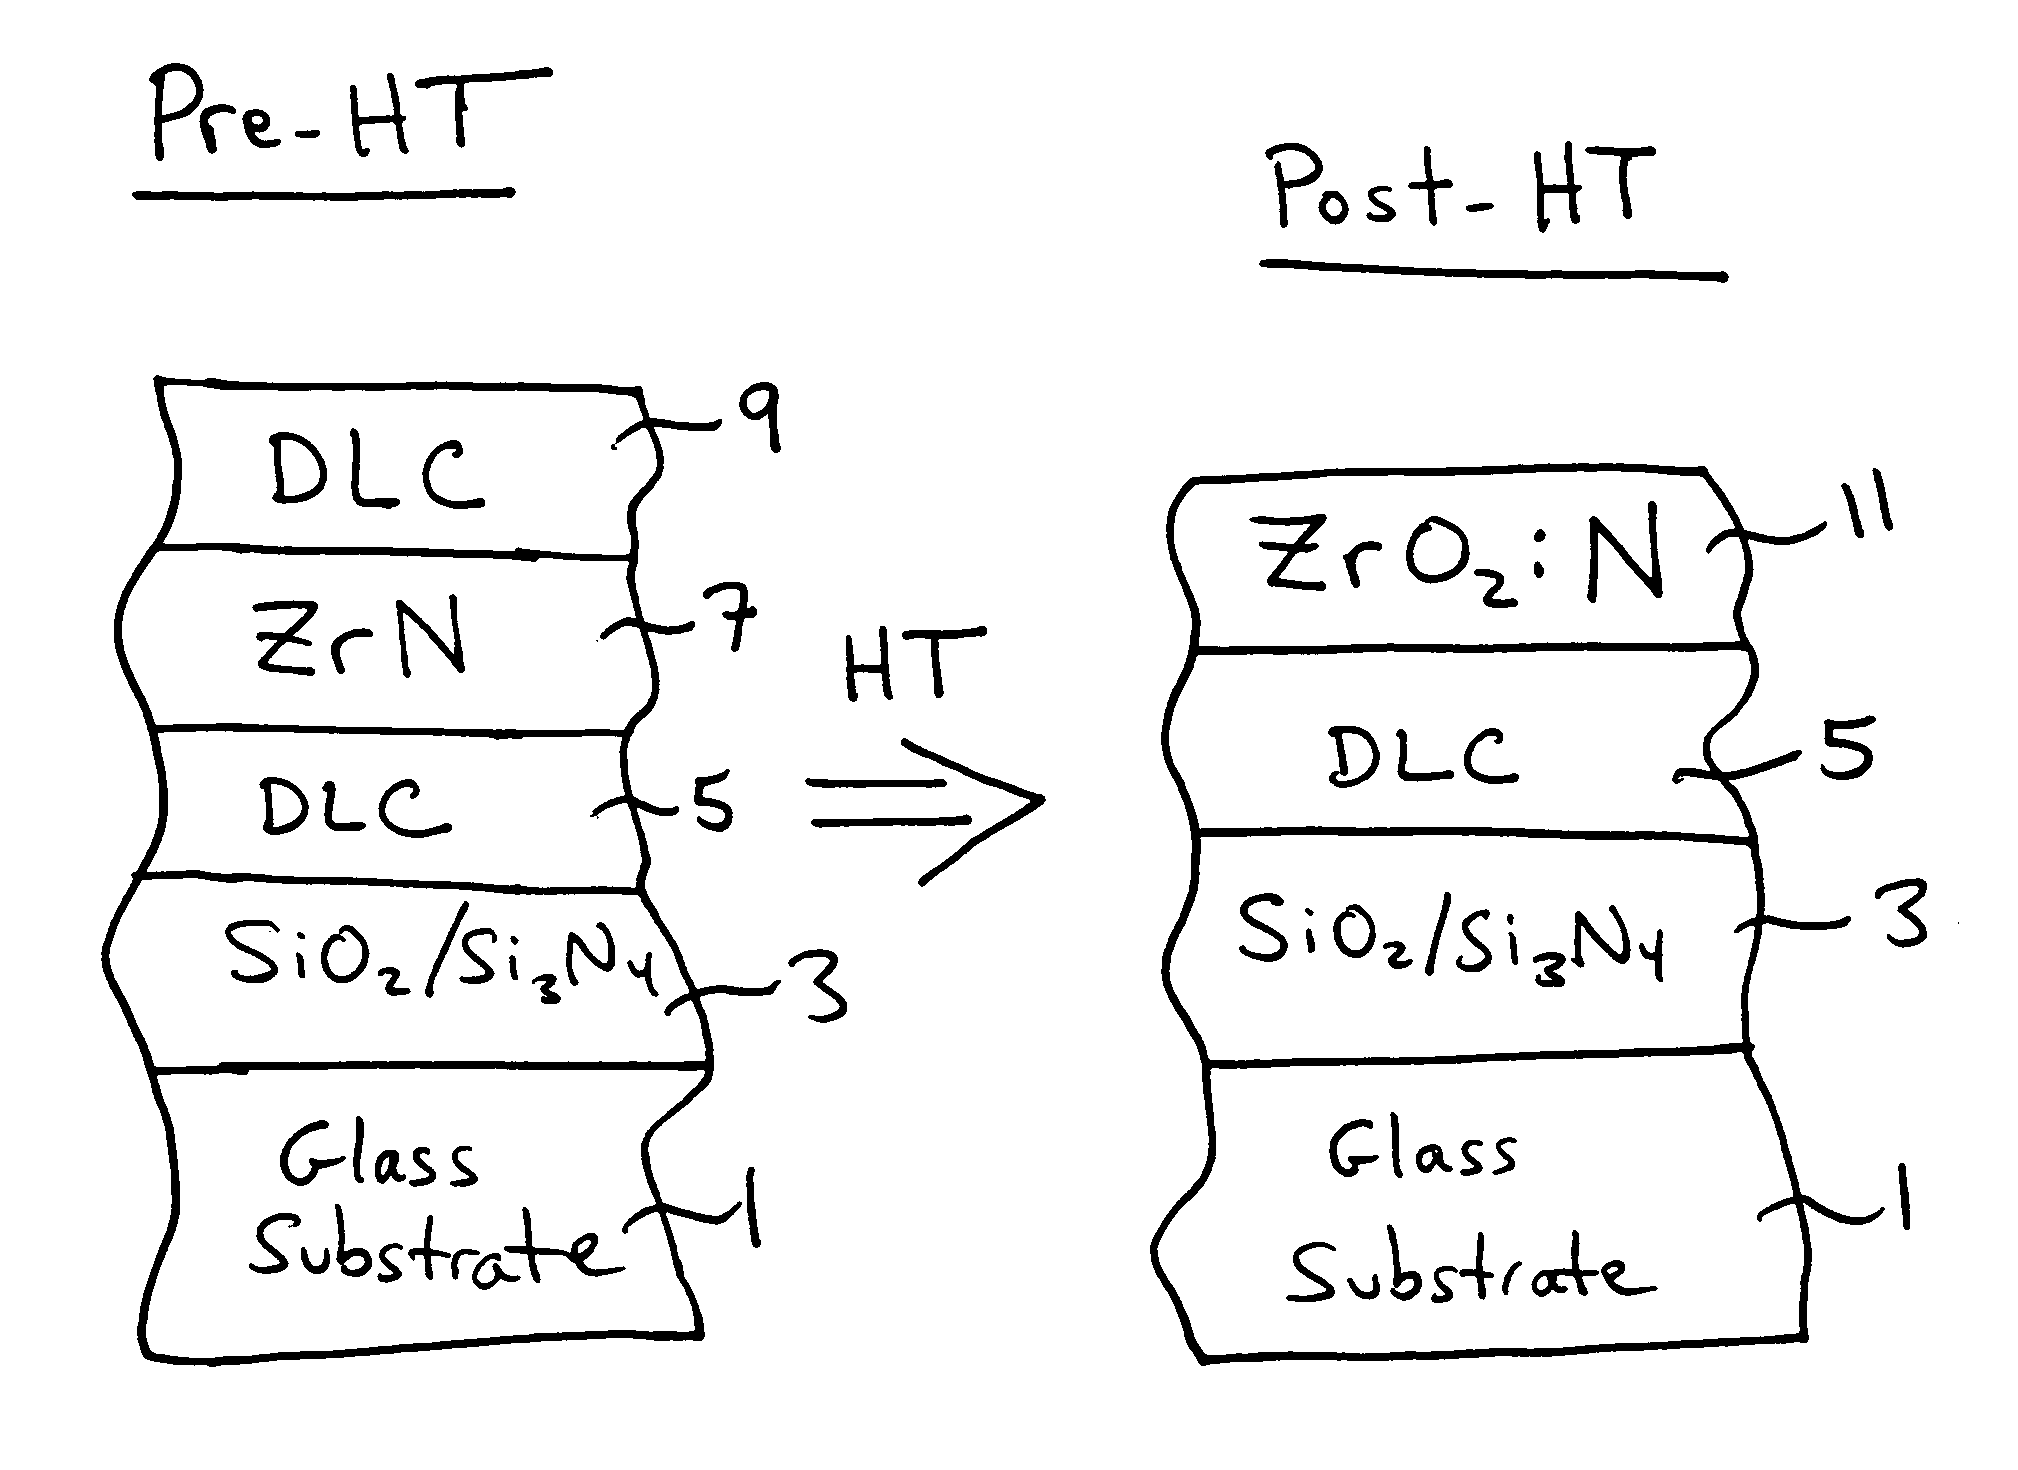 Method of making heat treatable coated article with diamond-like carbon (DLC) and/or zirconium in coating